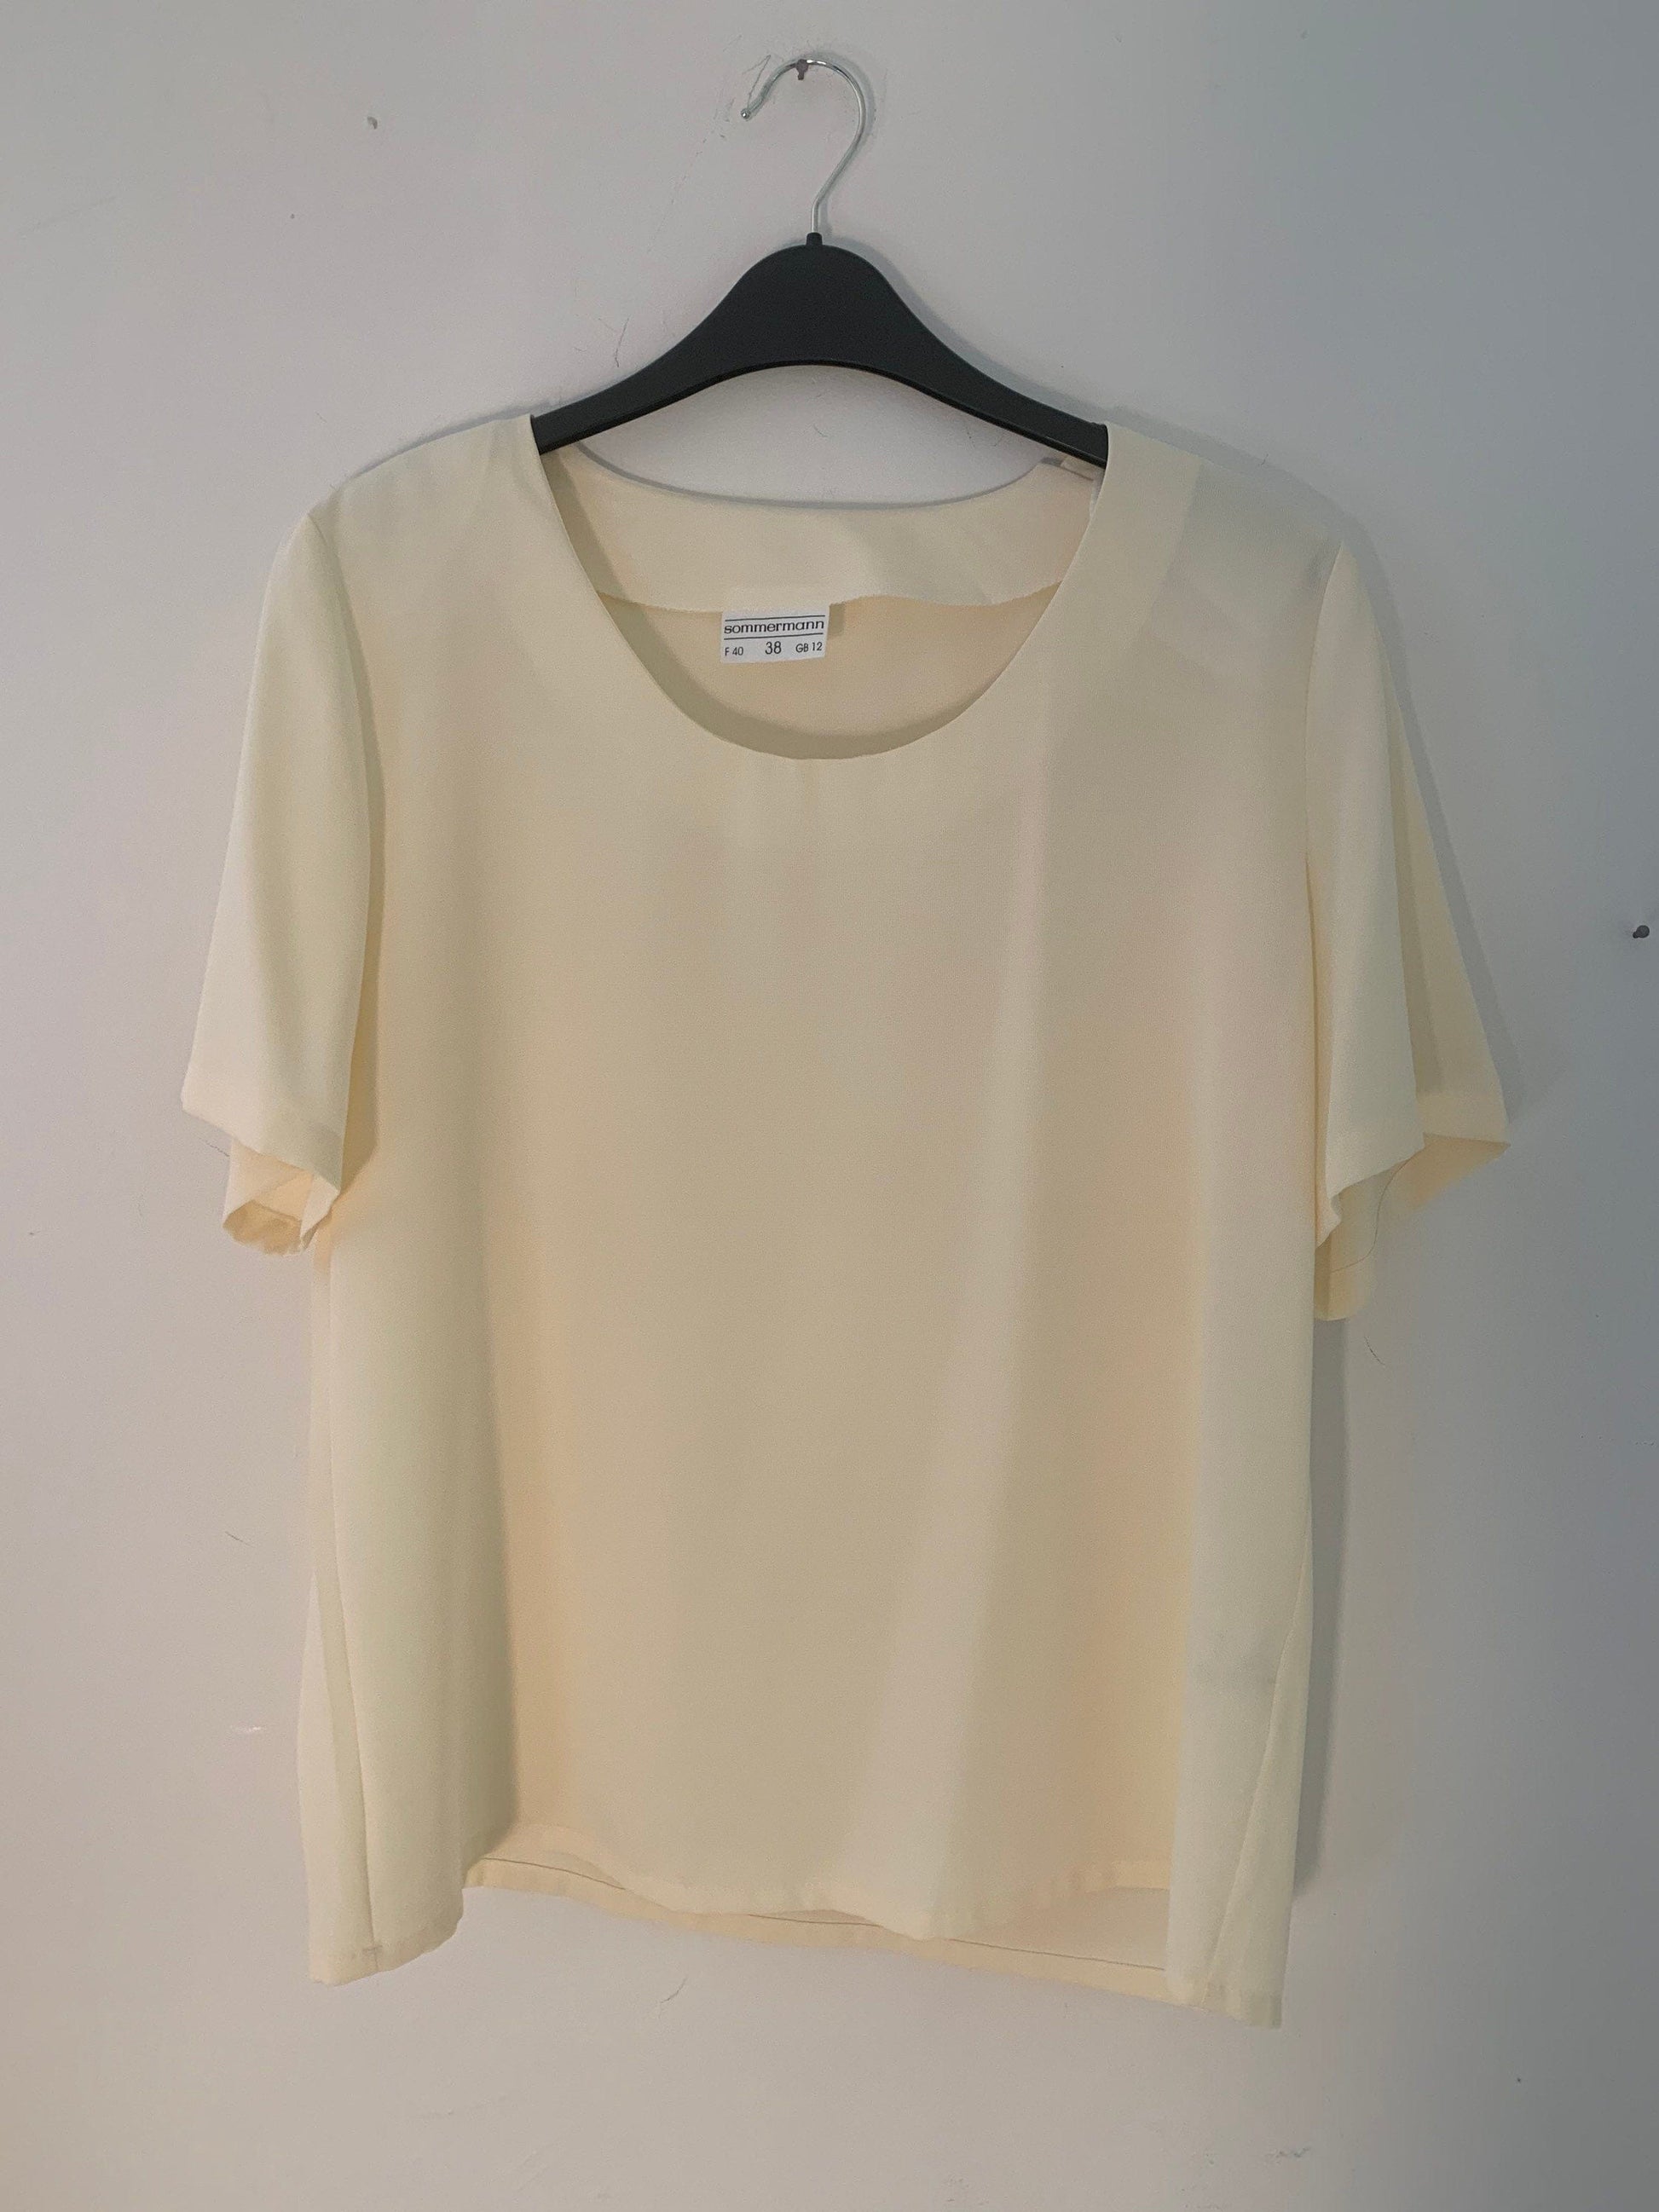 Pale yellow Vintage Blouse Semi Sheer Button Through Boxy short Sleeves - Size 14